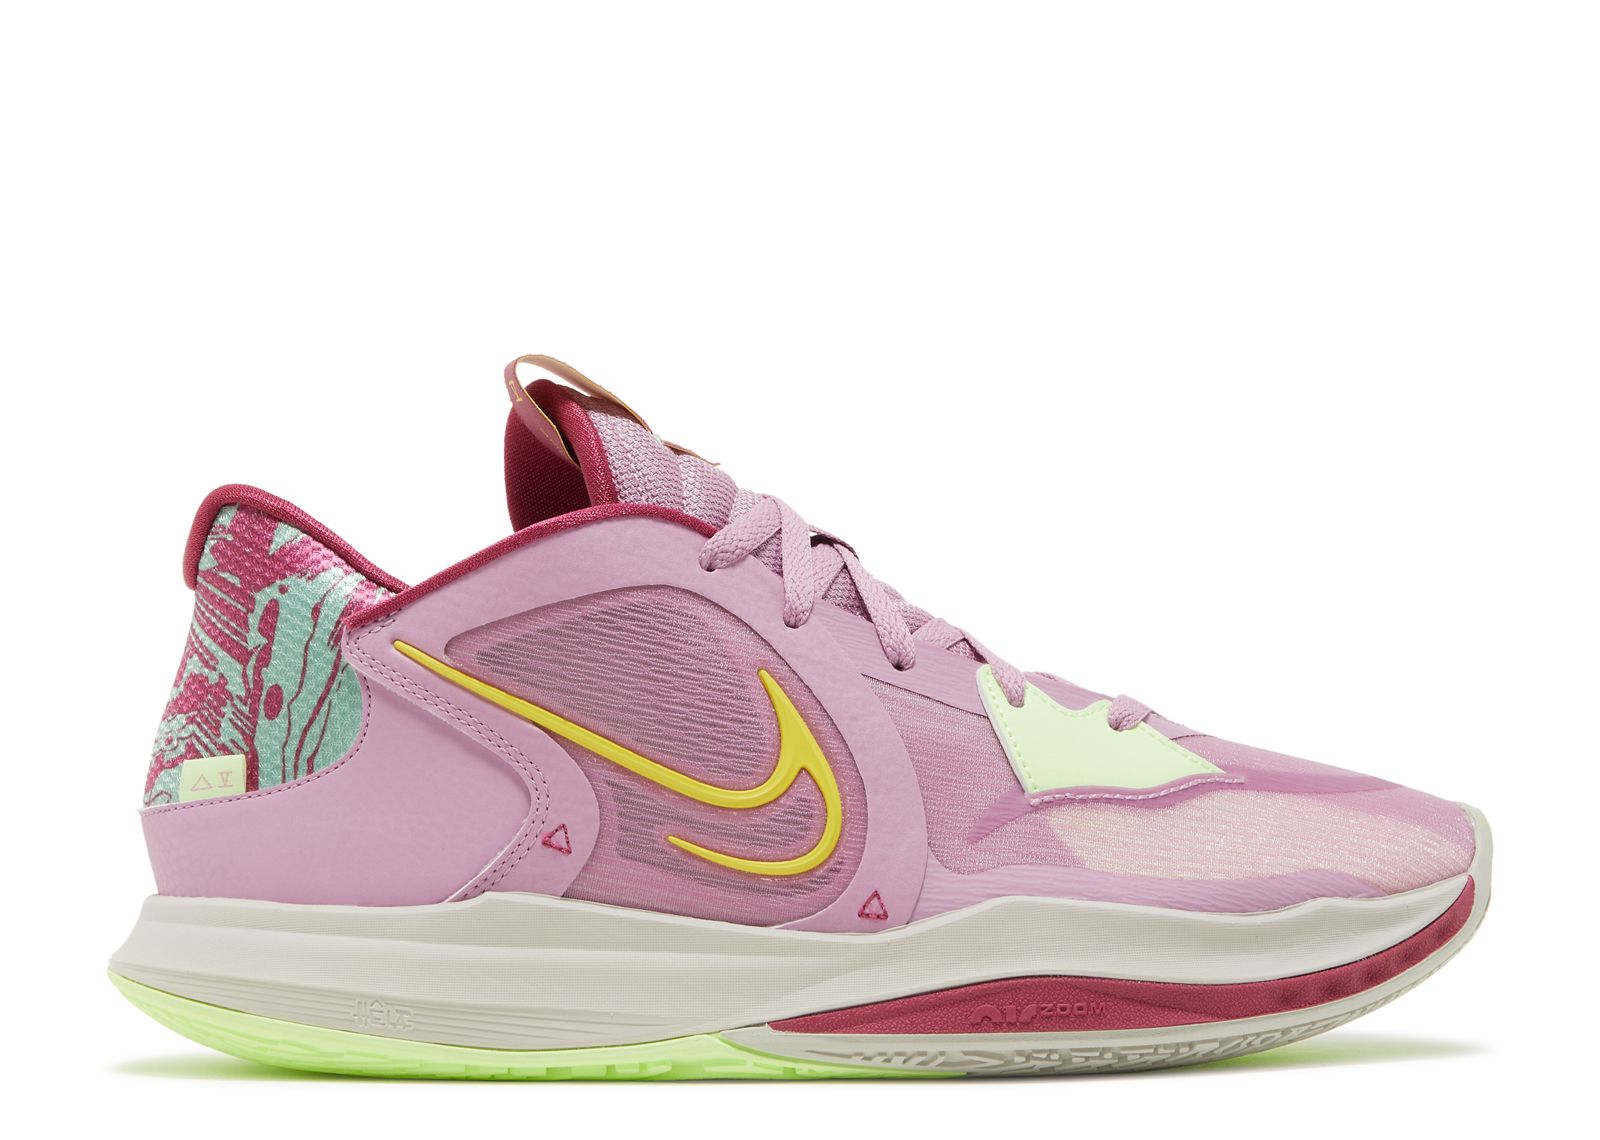 Kyrie Low 5 'Orchid'